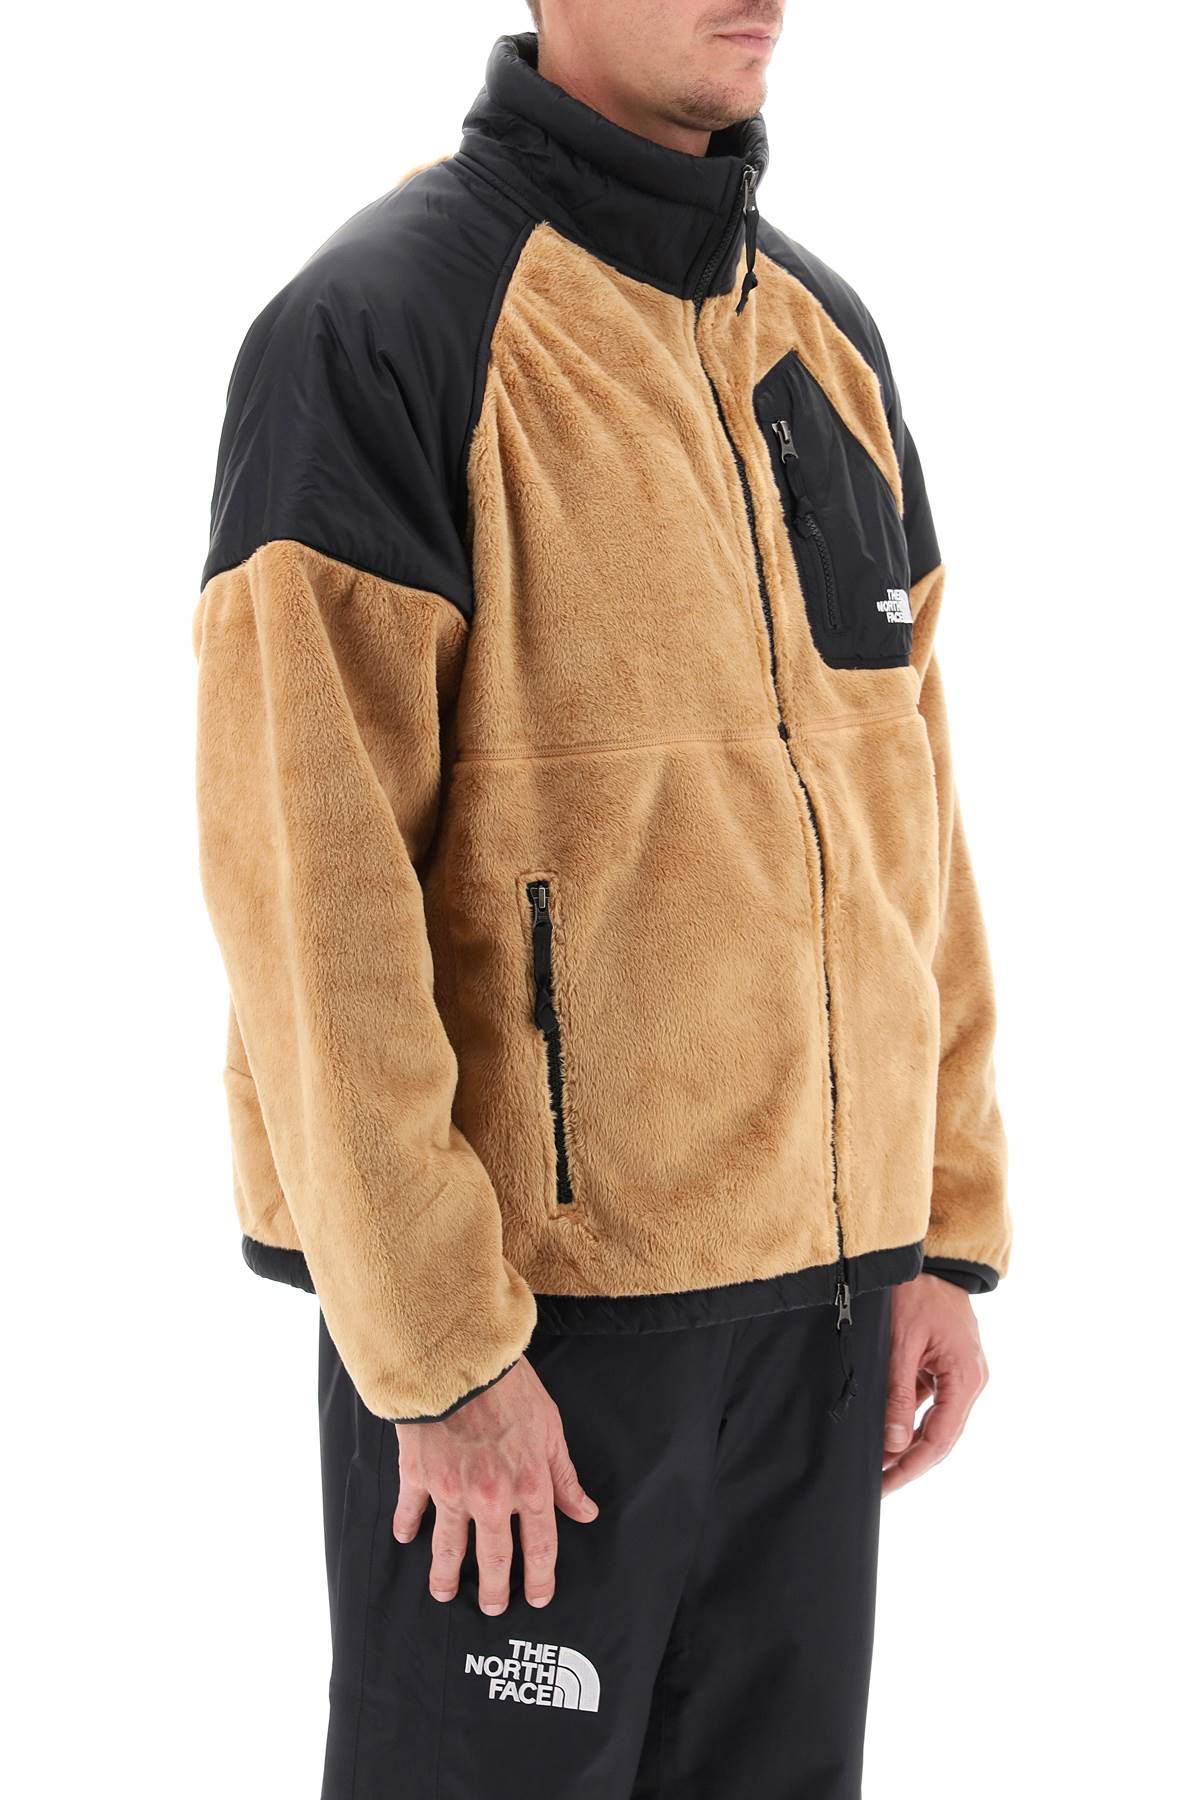 The north face fleece jacket with nylon inserts-1